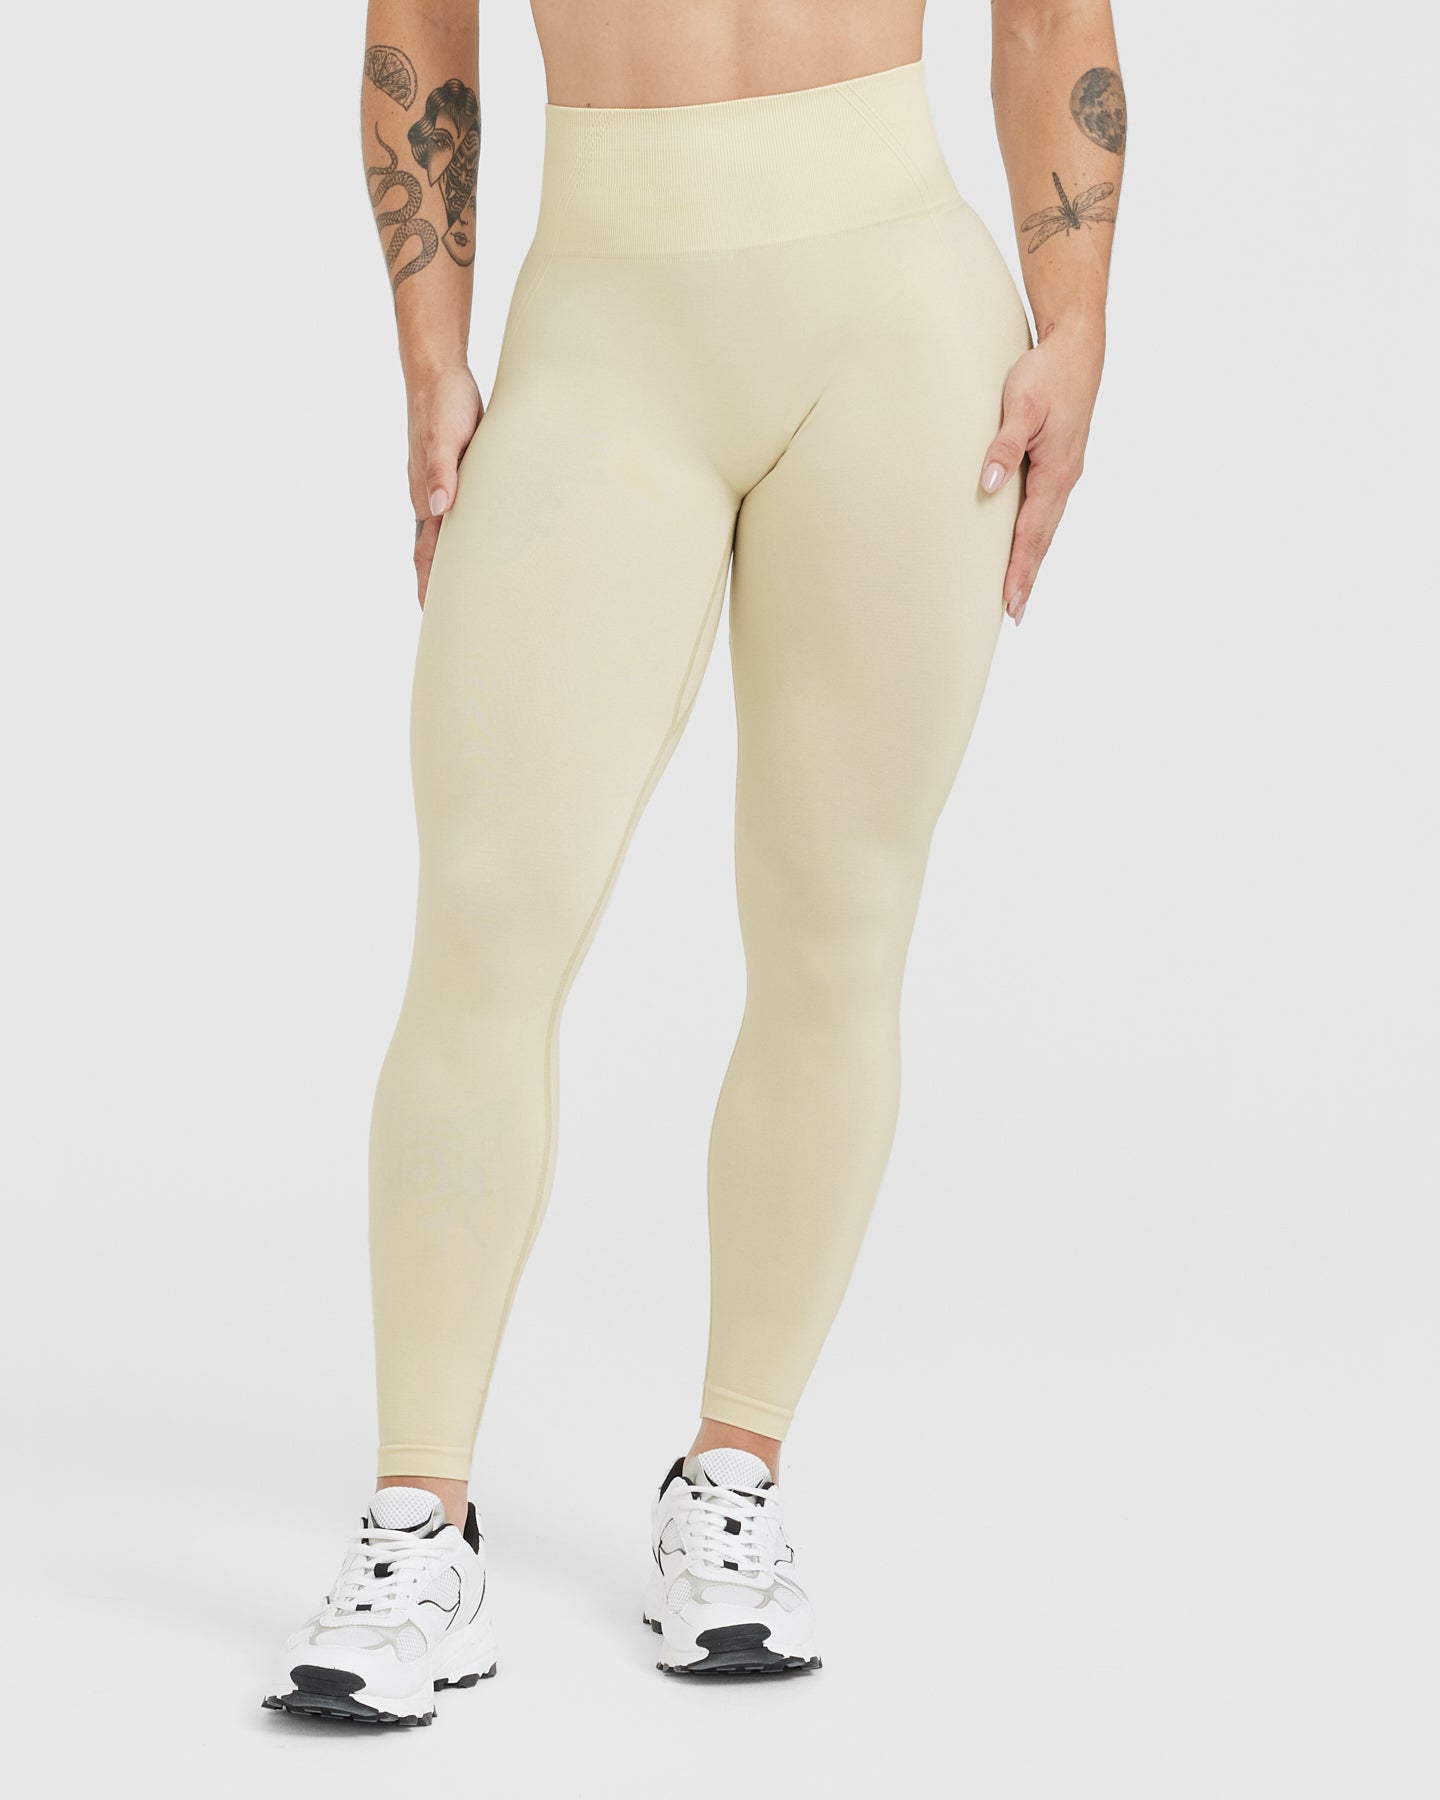 Oner Active Effortless Seamless Leggings Review - Gymfluencers